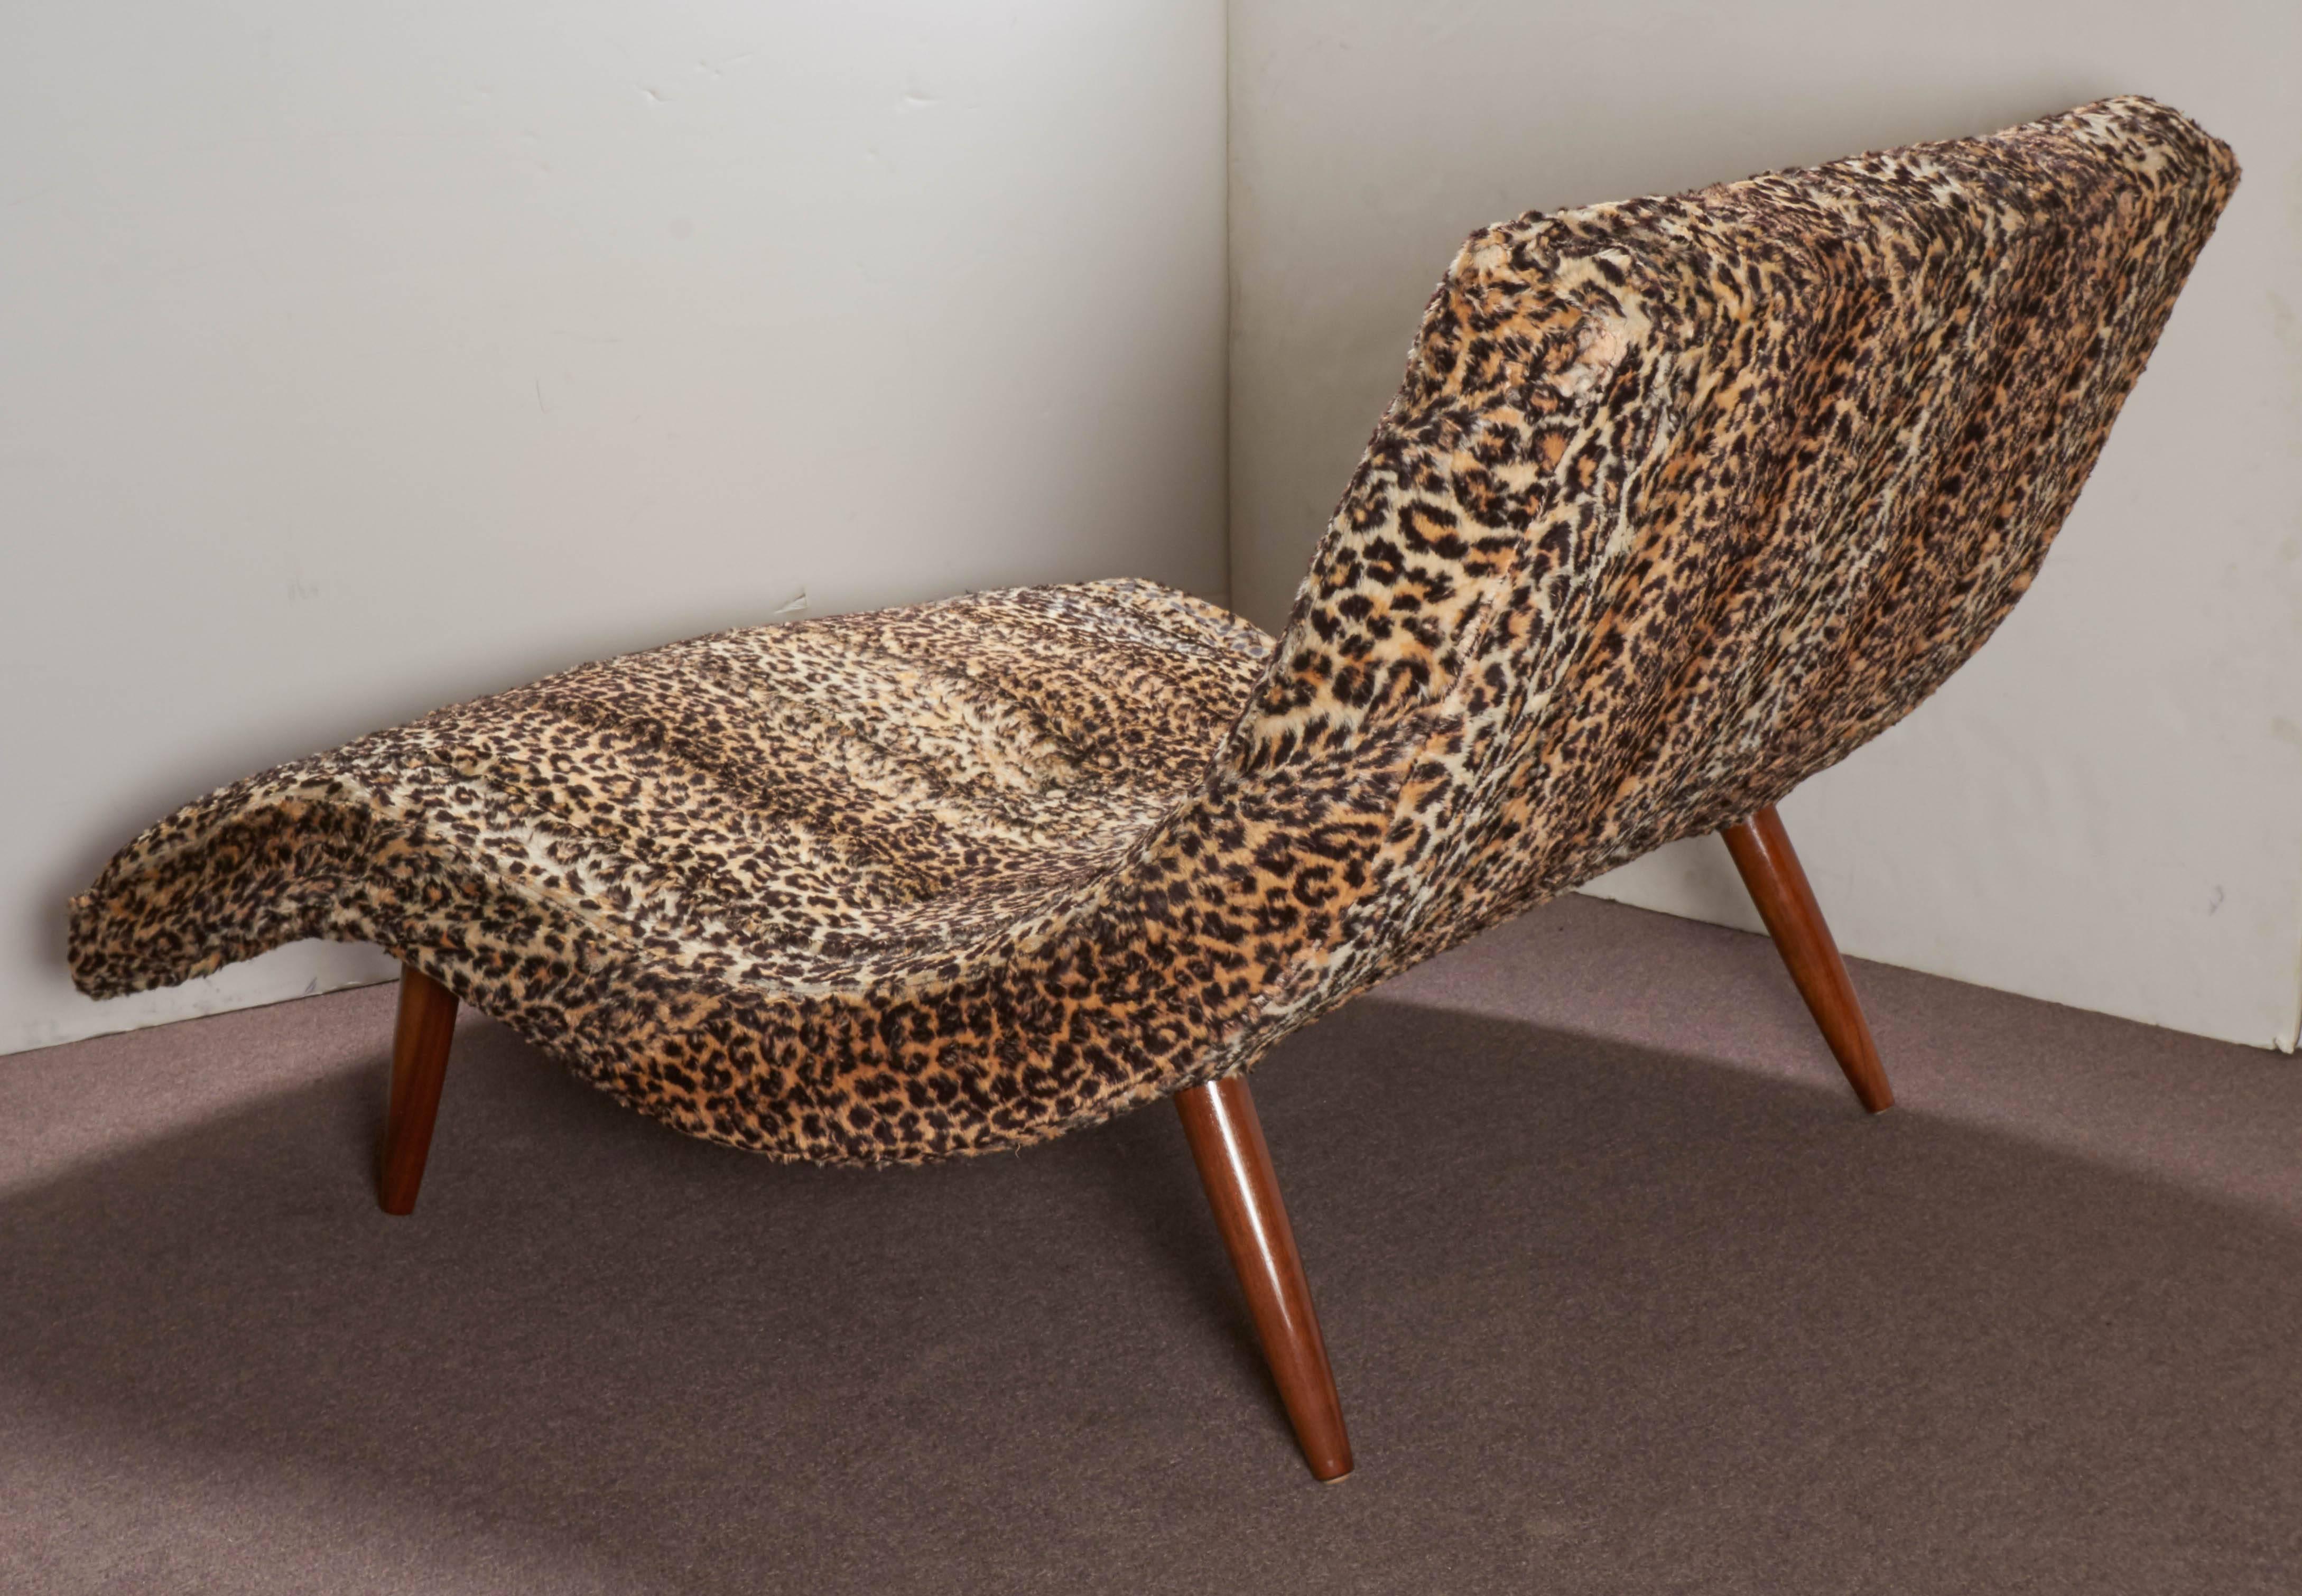 A modernist, wave design couples loveseat or recamier in the style of Adrian Pearsall in leopard faux fur. This comfortably designed seating area can accommodate either one or two people.
The tapered walnut legs are French polished and in good